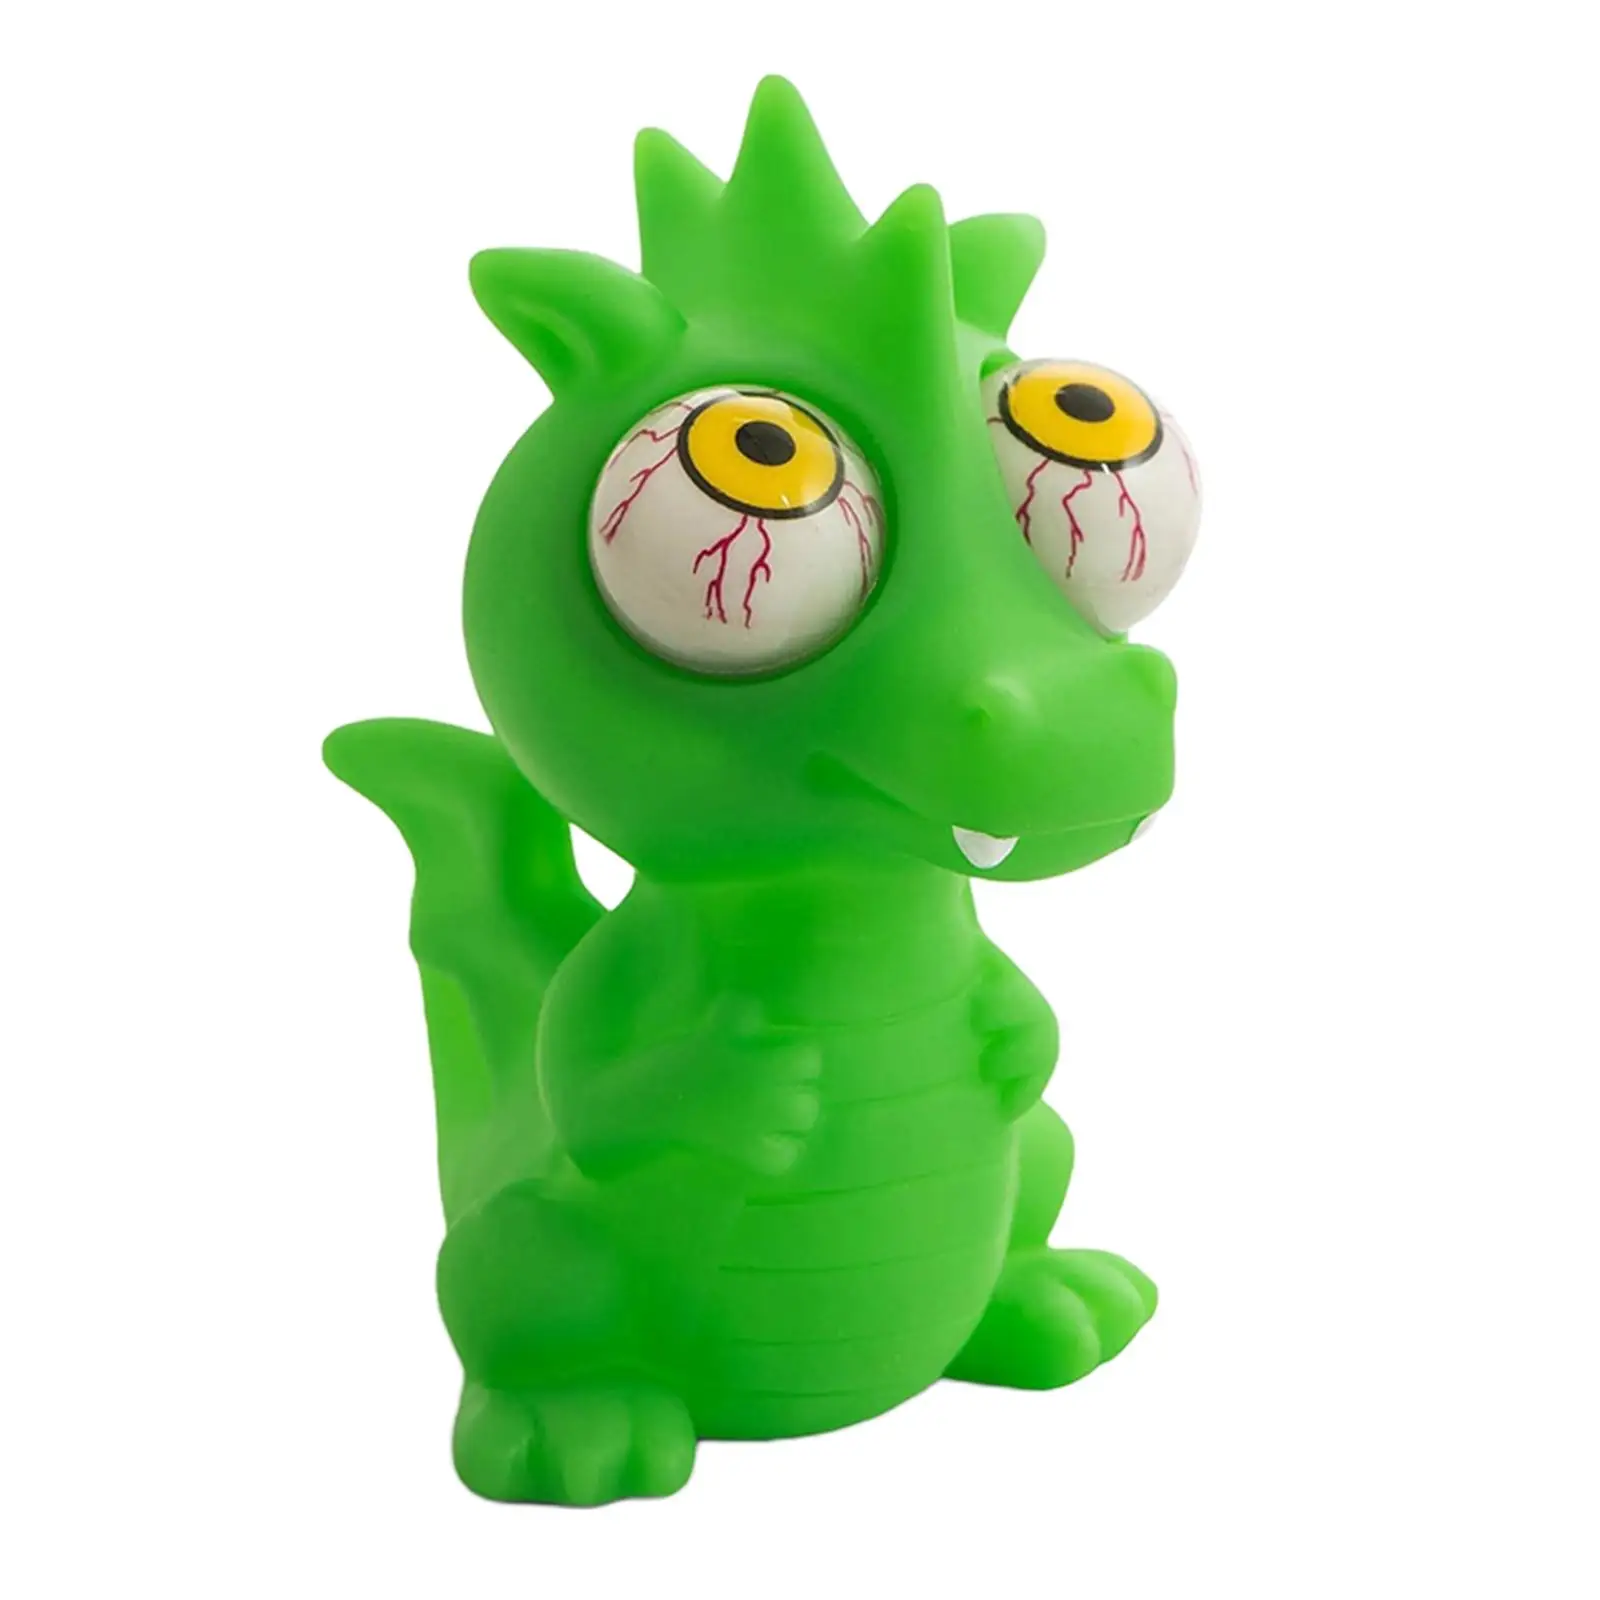 Squeeze Antistress Toy Eye Popping Latex Free Anti-Anxiety Large Squeeze Animal Fidget Sensory Toys Toy Figure for Kids